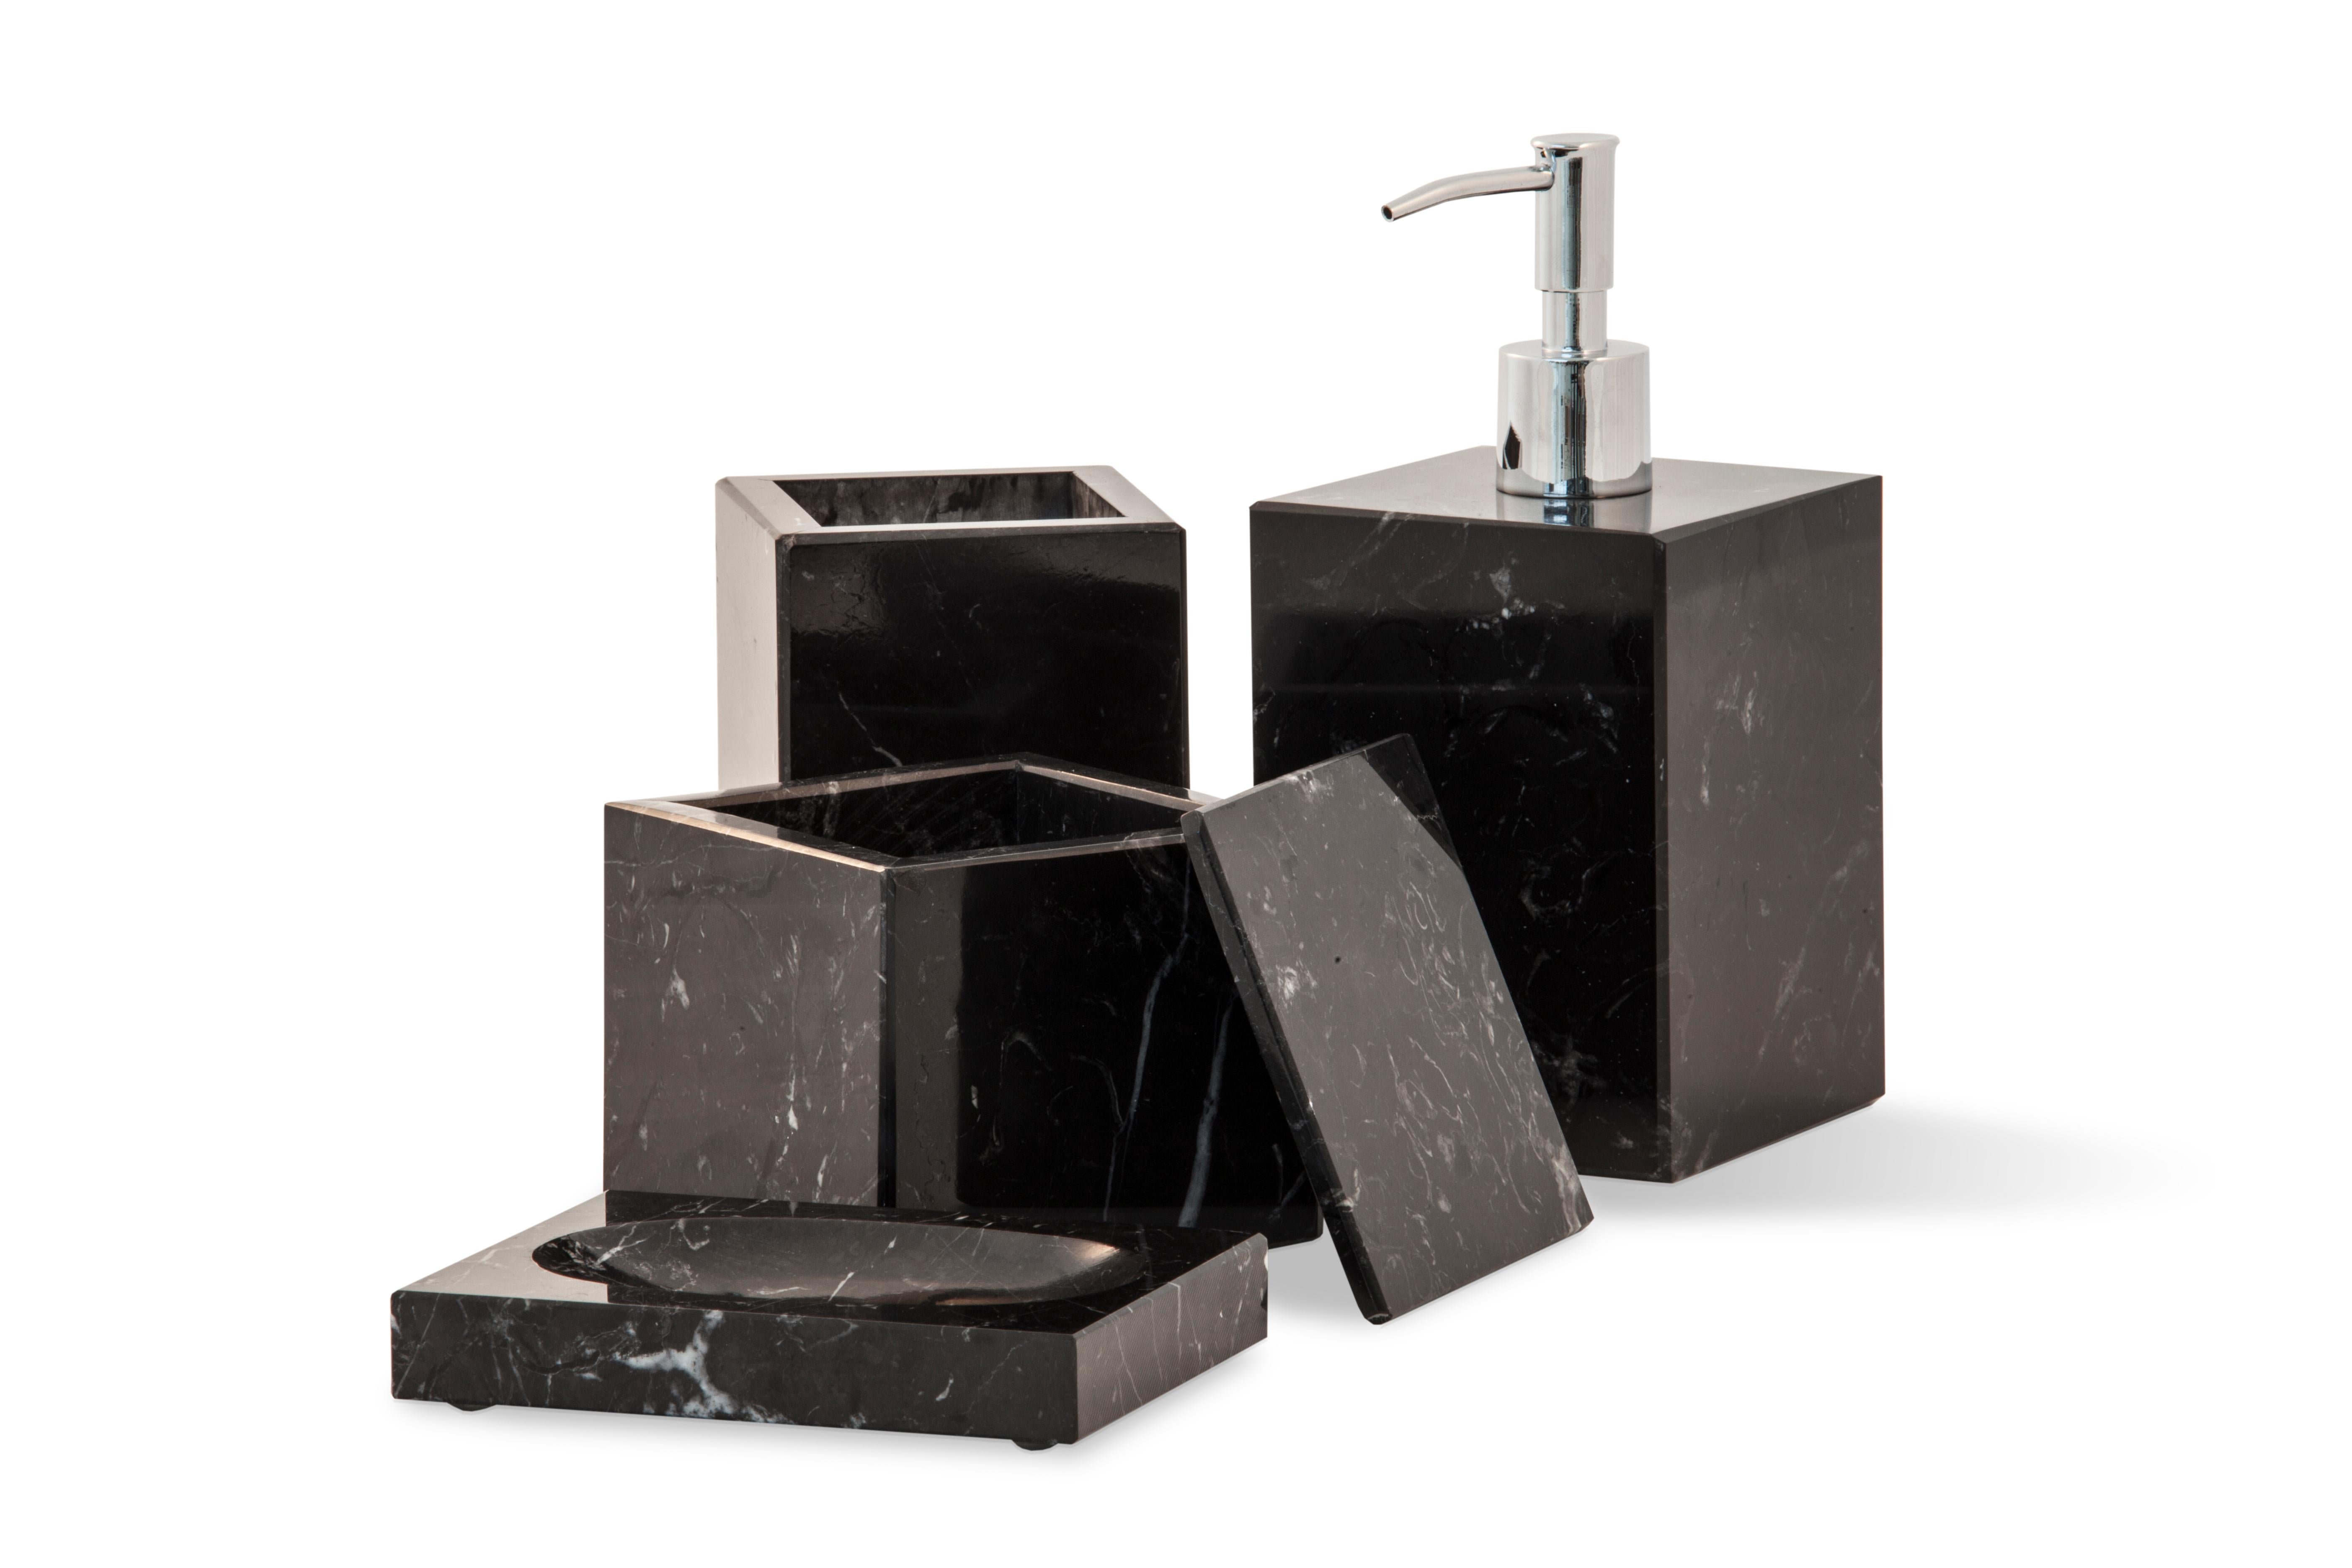 Squared soap dish in black Marquina marble with little holes for water.

Each piece is in a way unique (since each marble block is different in veins and shades) and handcrafted in Italy. Slight variations in shape, color and size are to be